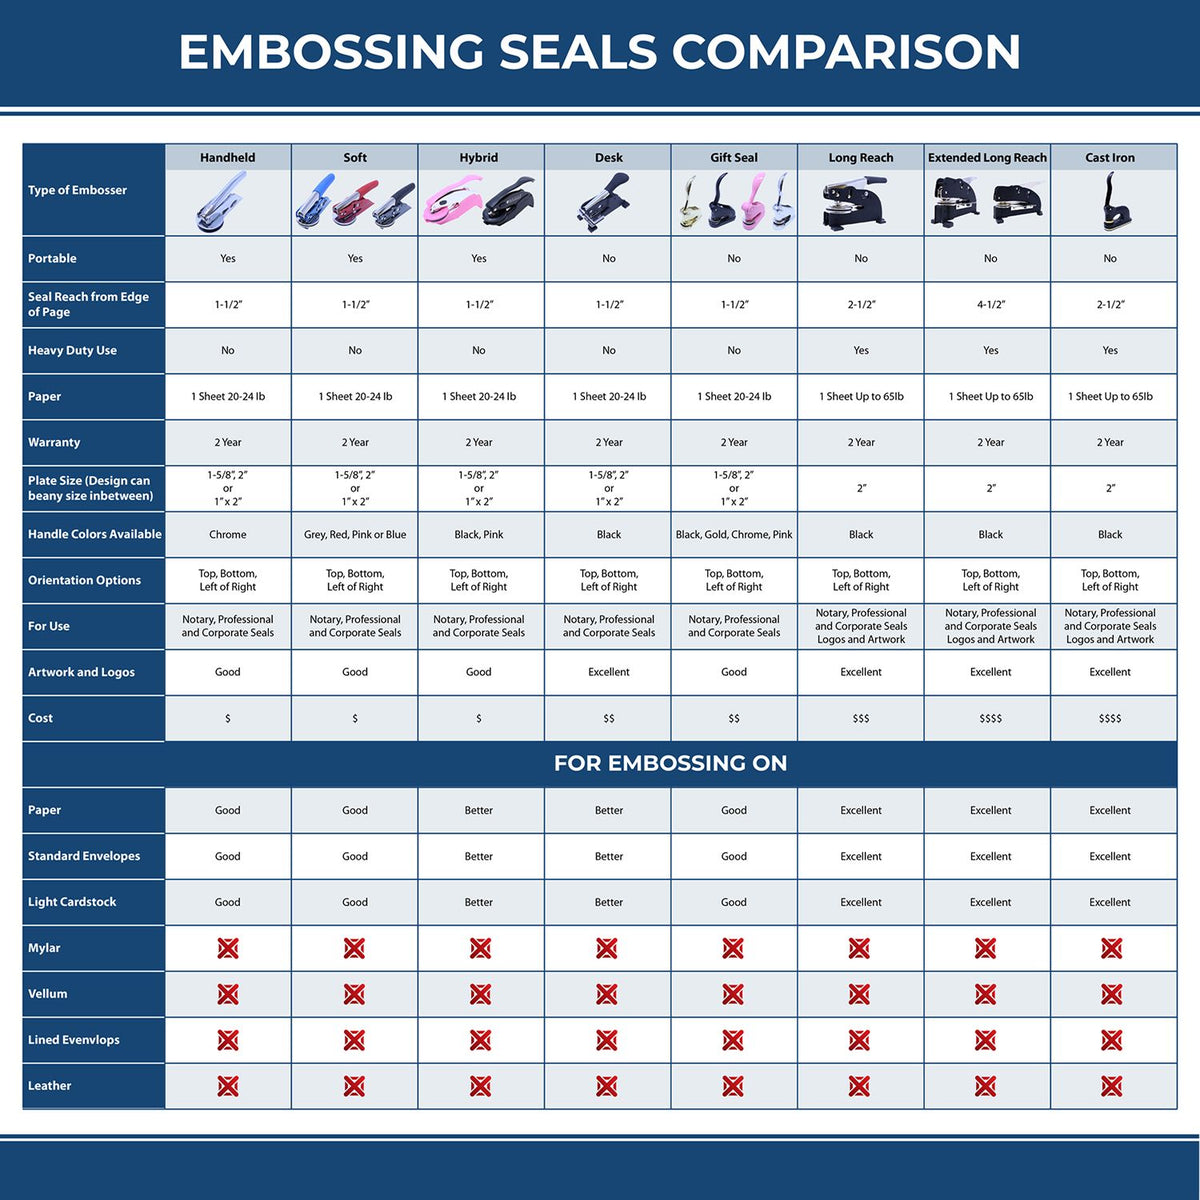 A comparison chart for the different types of mount models available for the Handheld Vermont Architect Seal Embosser.